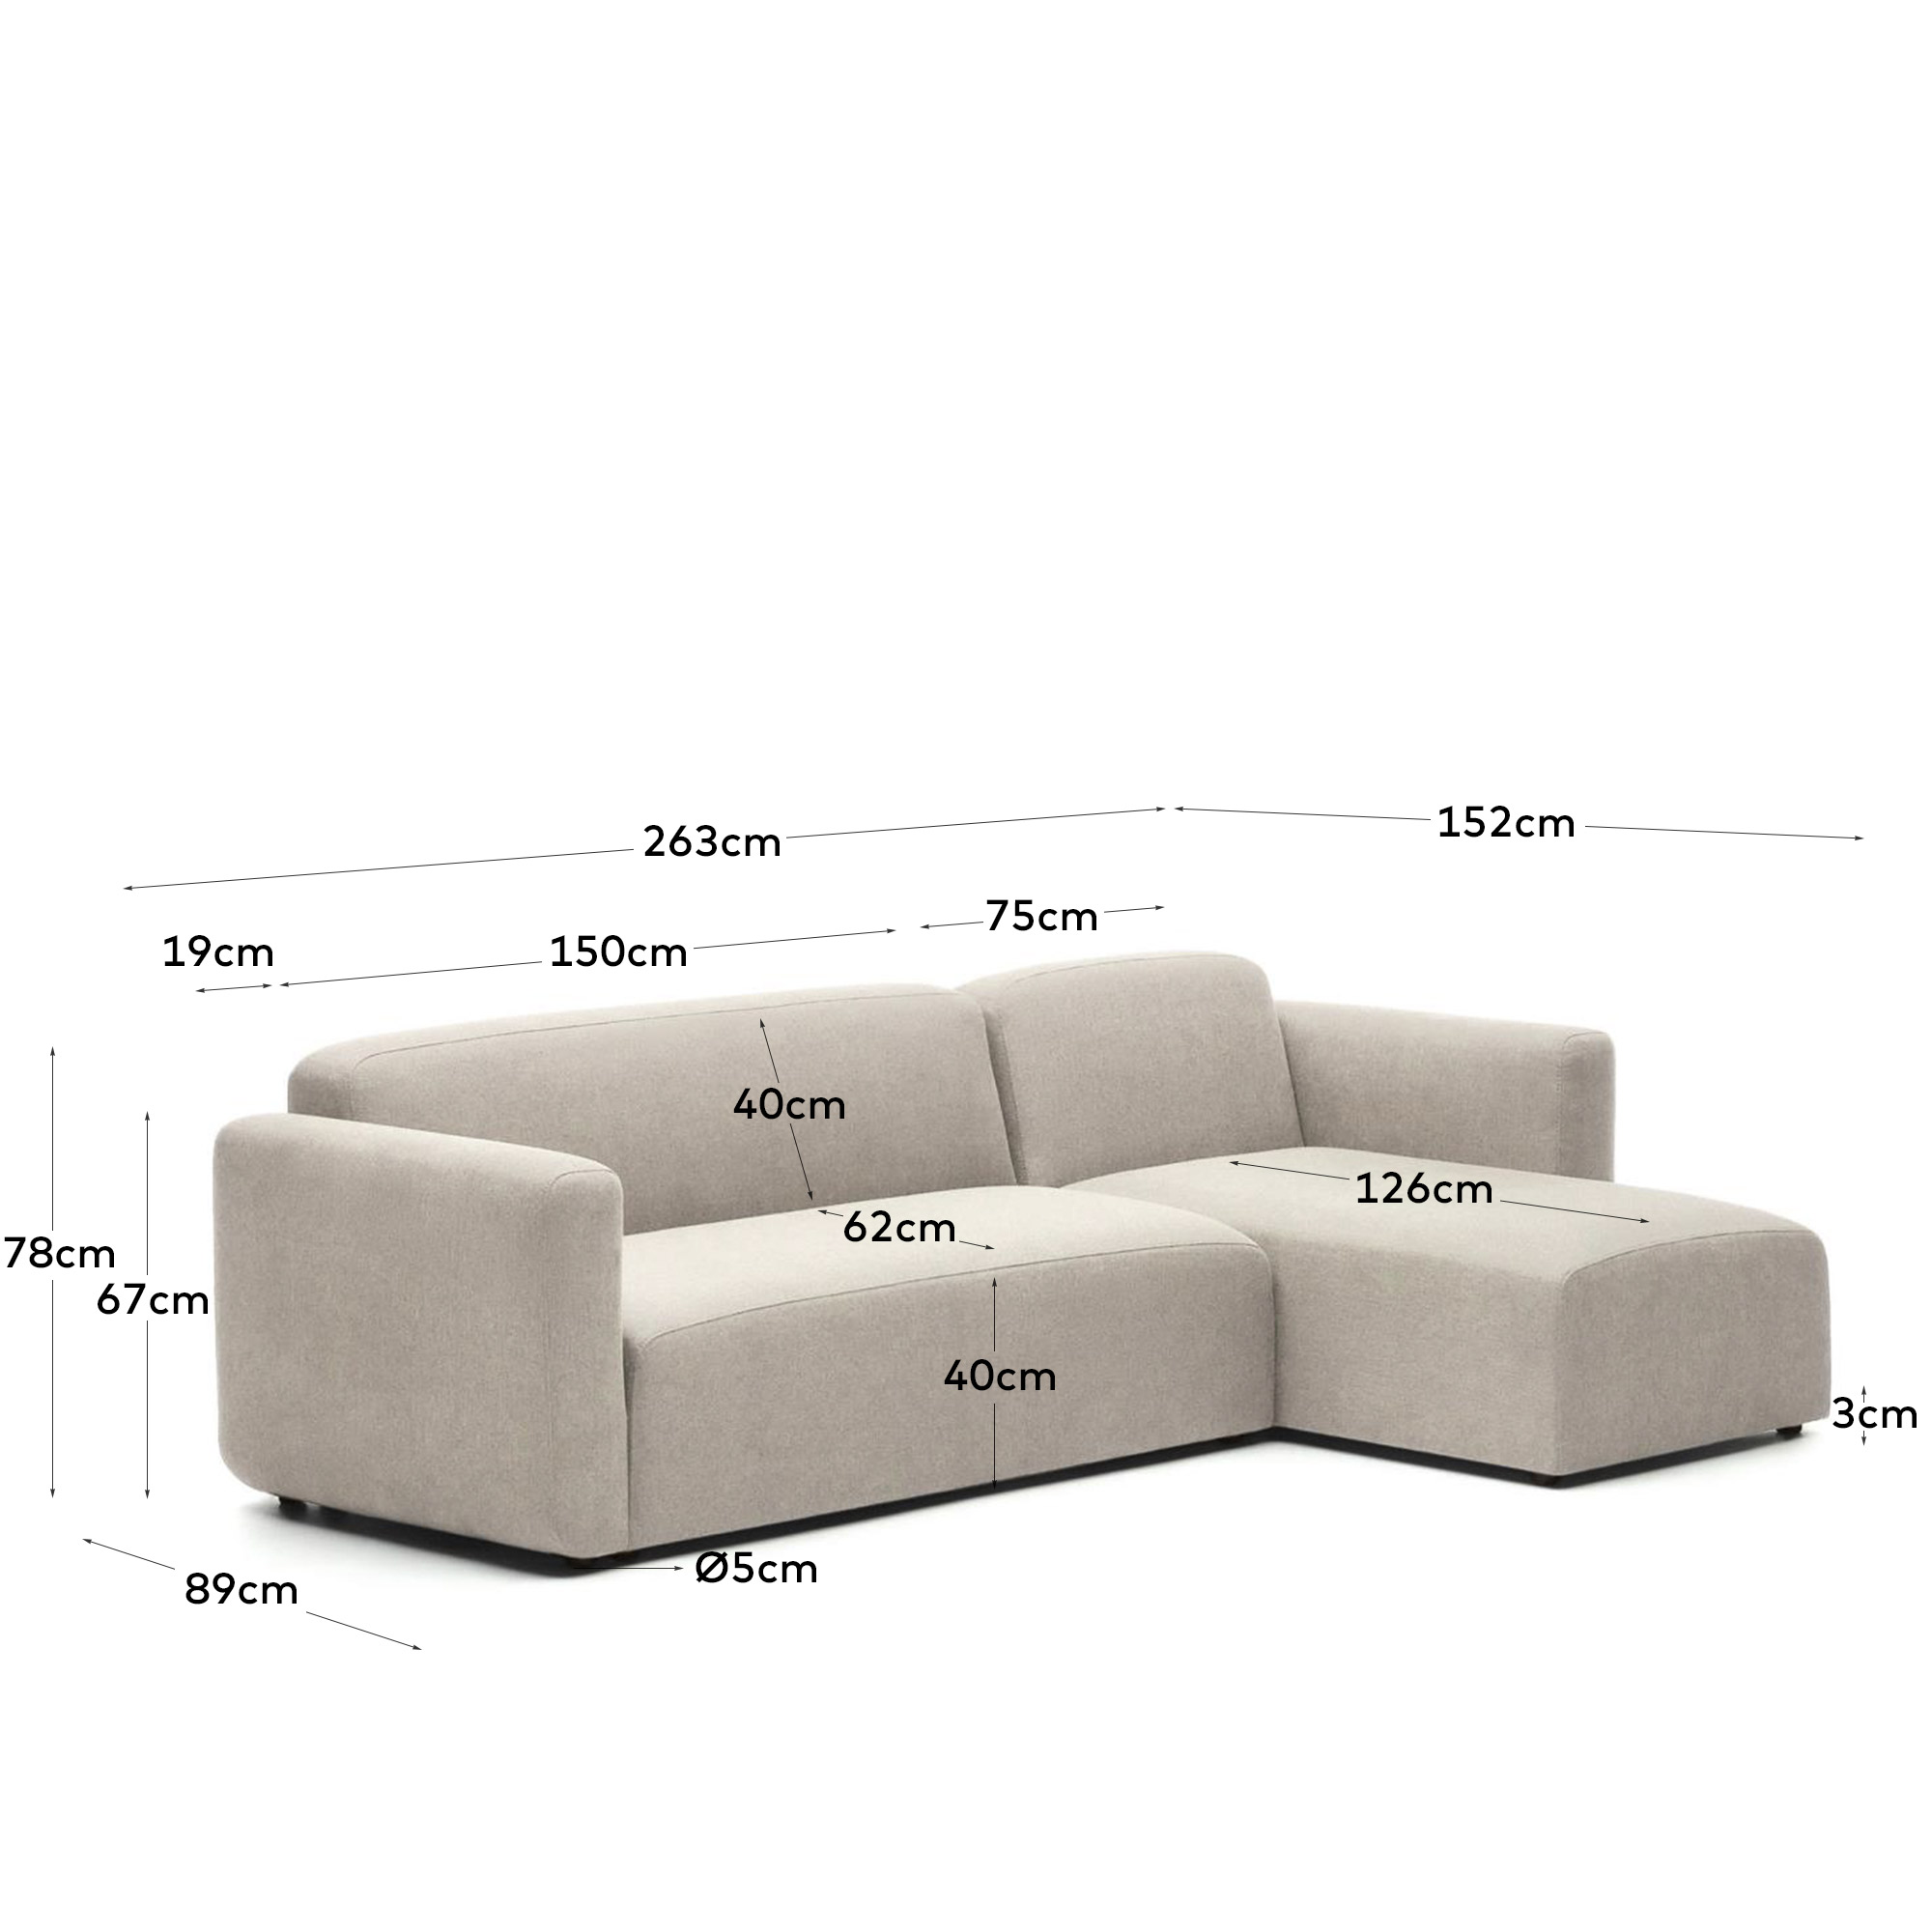 Neom 3 seater modular sofa, right/left chaise longue in beige, 263 cm - sizes